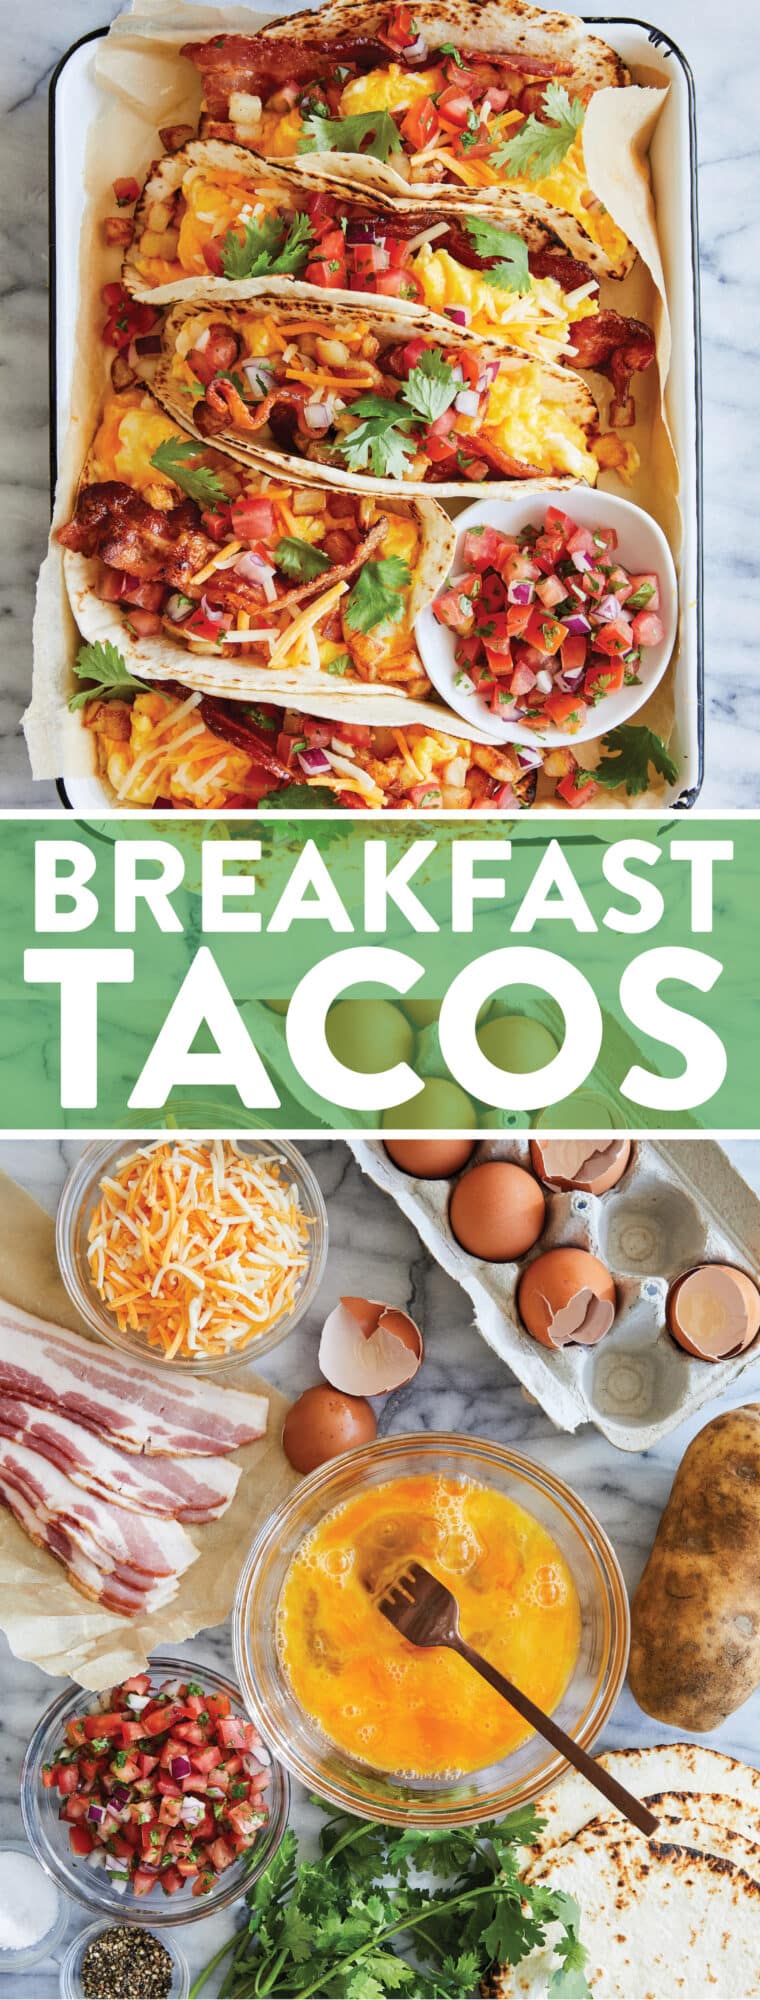 Breakfast Tacos - An absolute crowd favorite! Served in warm tortillas with crispy bacon, potatoes, scrambled eggs and your favorite toppings!